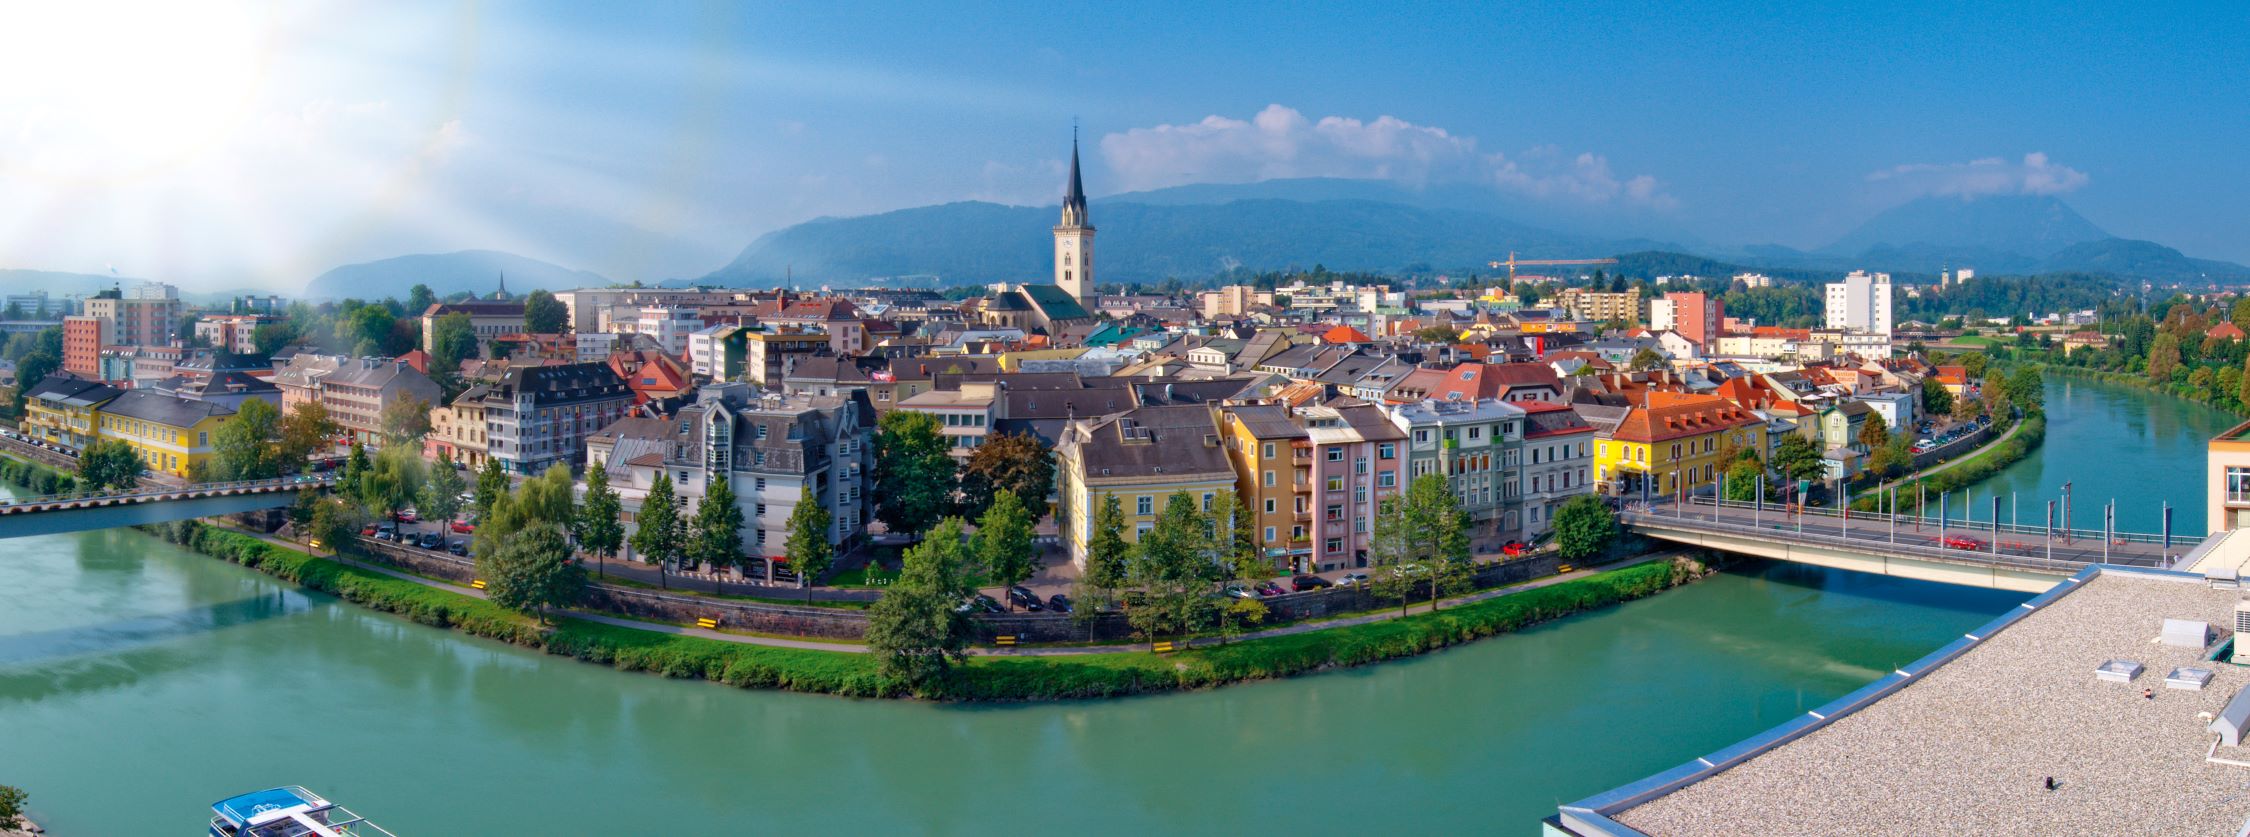 Panorama of the city of Villach and the river Drau